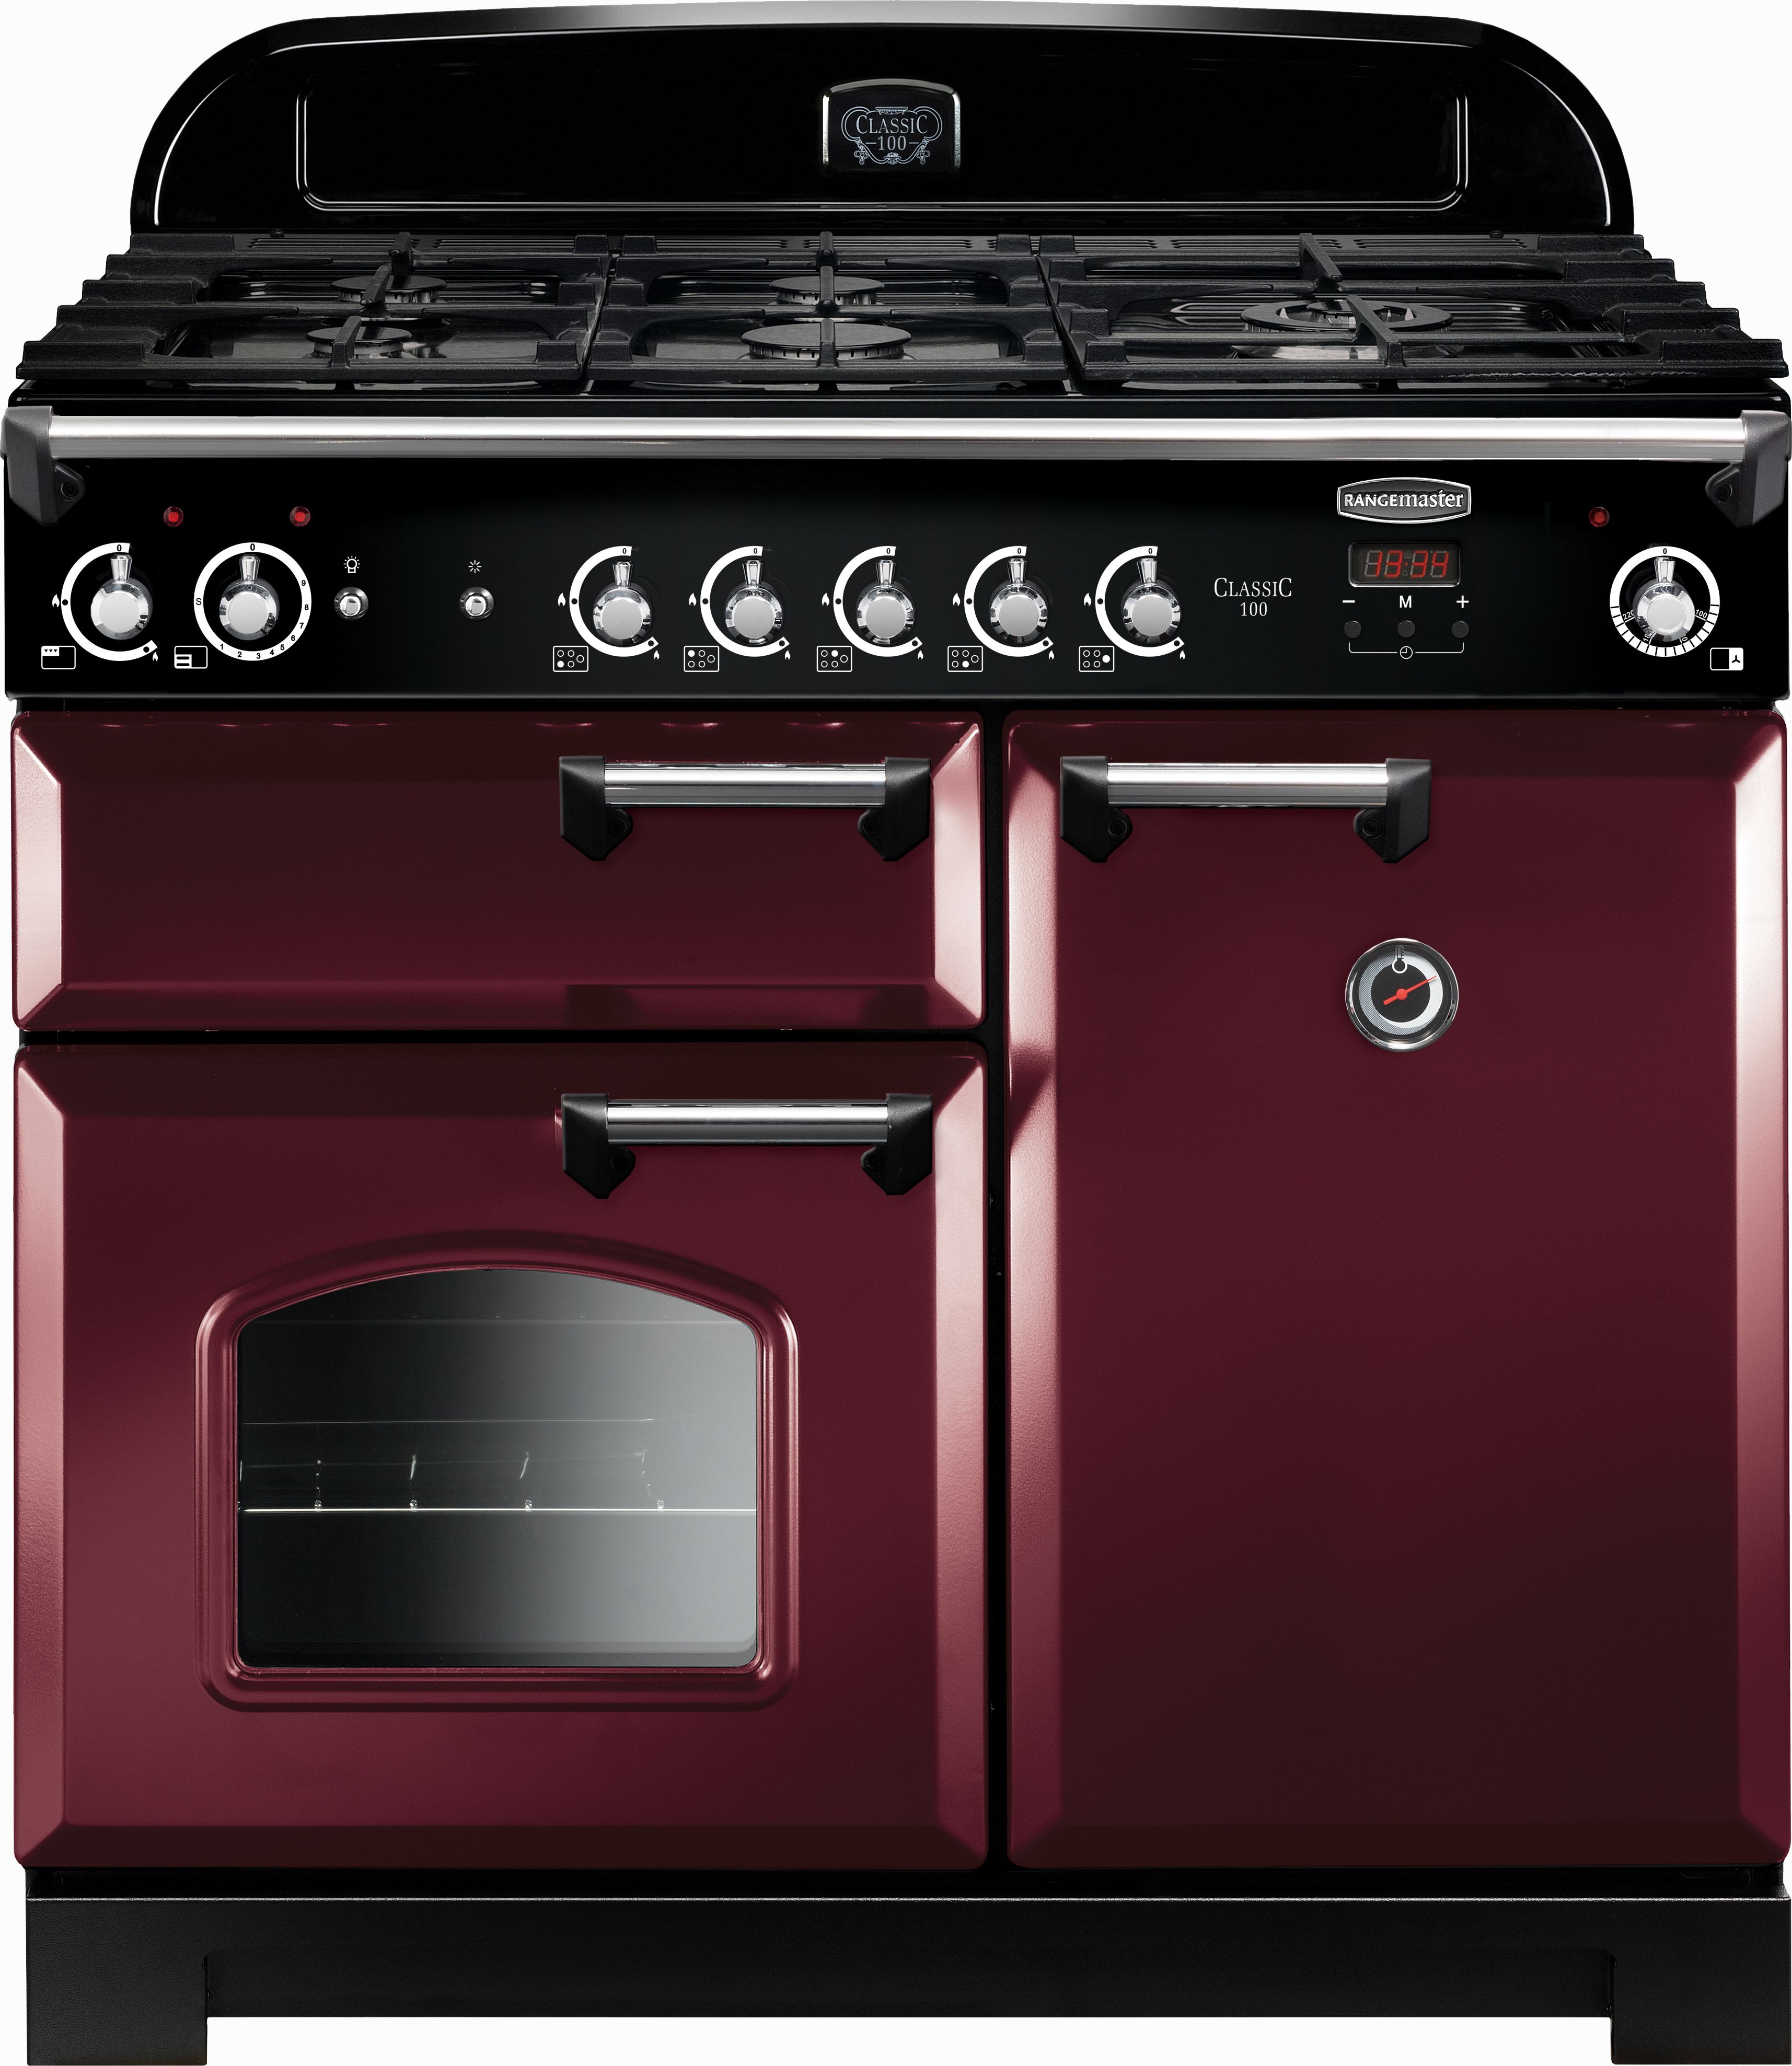 Rangemaster Classic CLA100NGFCY/C 100cm Gas Range Cooker with Electric Fan Oven - Cranberry / Chrome - A+/A Rated, Red